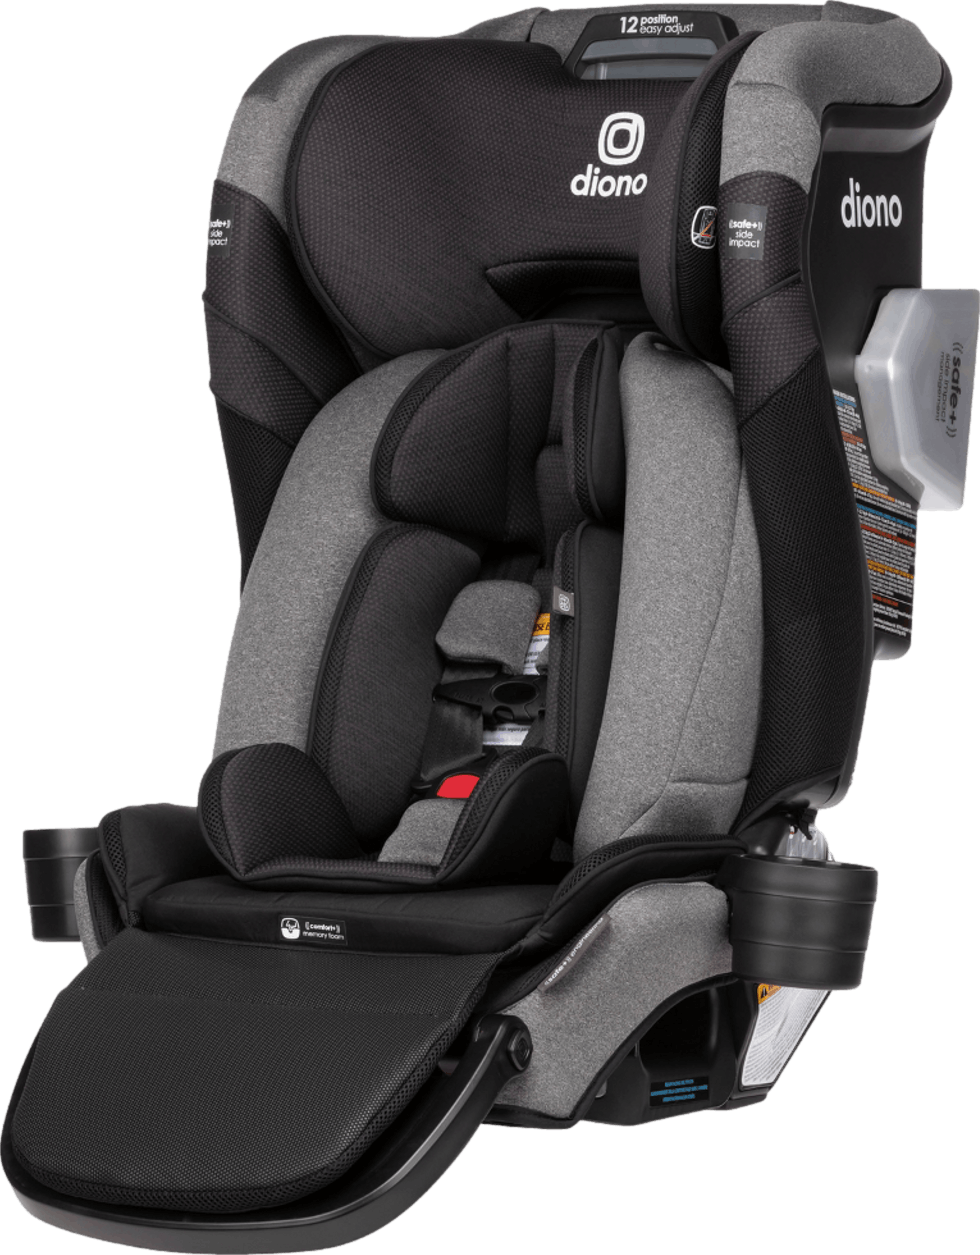 Diono Radian® 3QXT+ All-in-One Convertible Car Seat · Black Jet